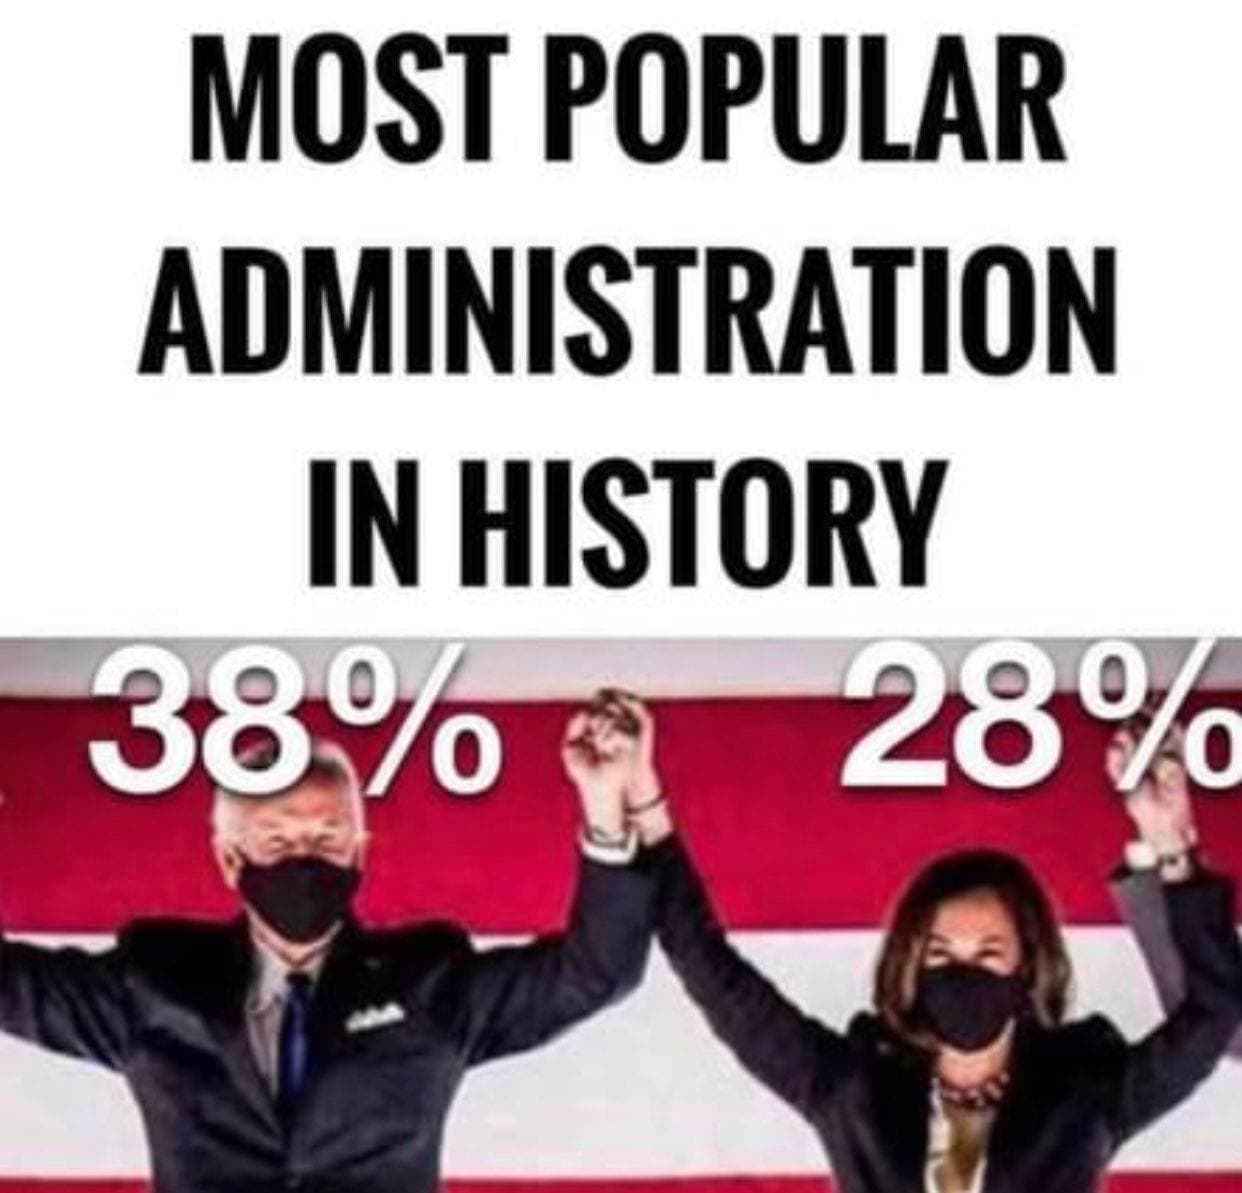 Most popular administration in history